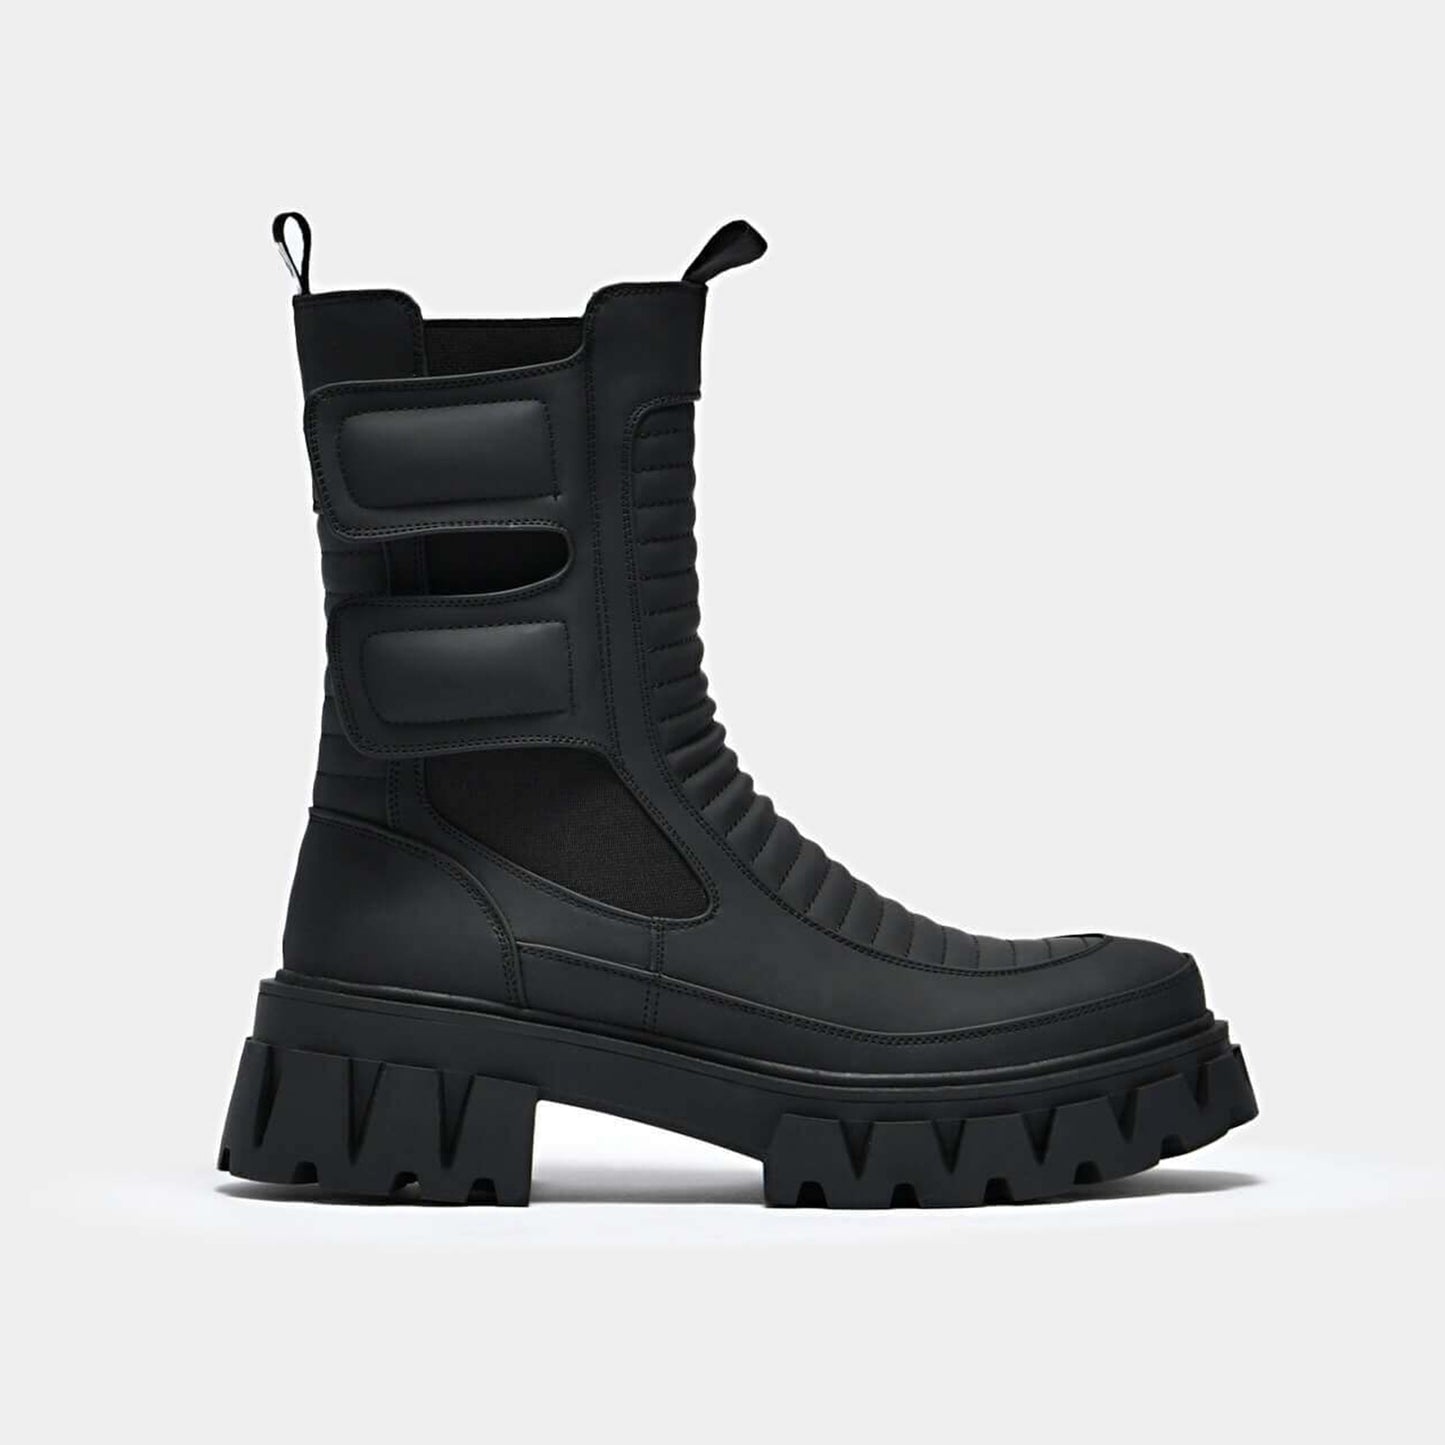 Vader Men's Padded Croft Boots - Ankle Boots - KOI Footwear - Black - Side View